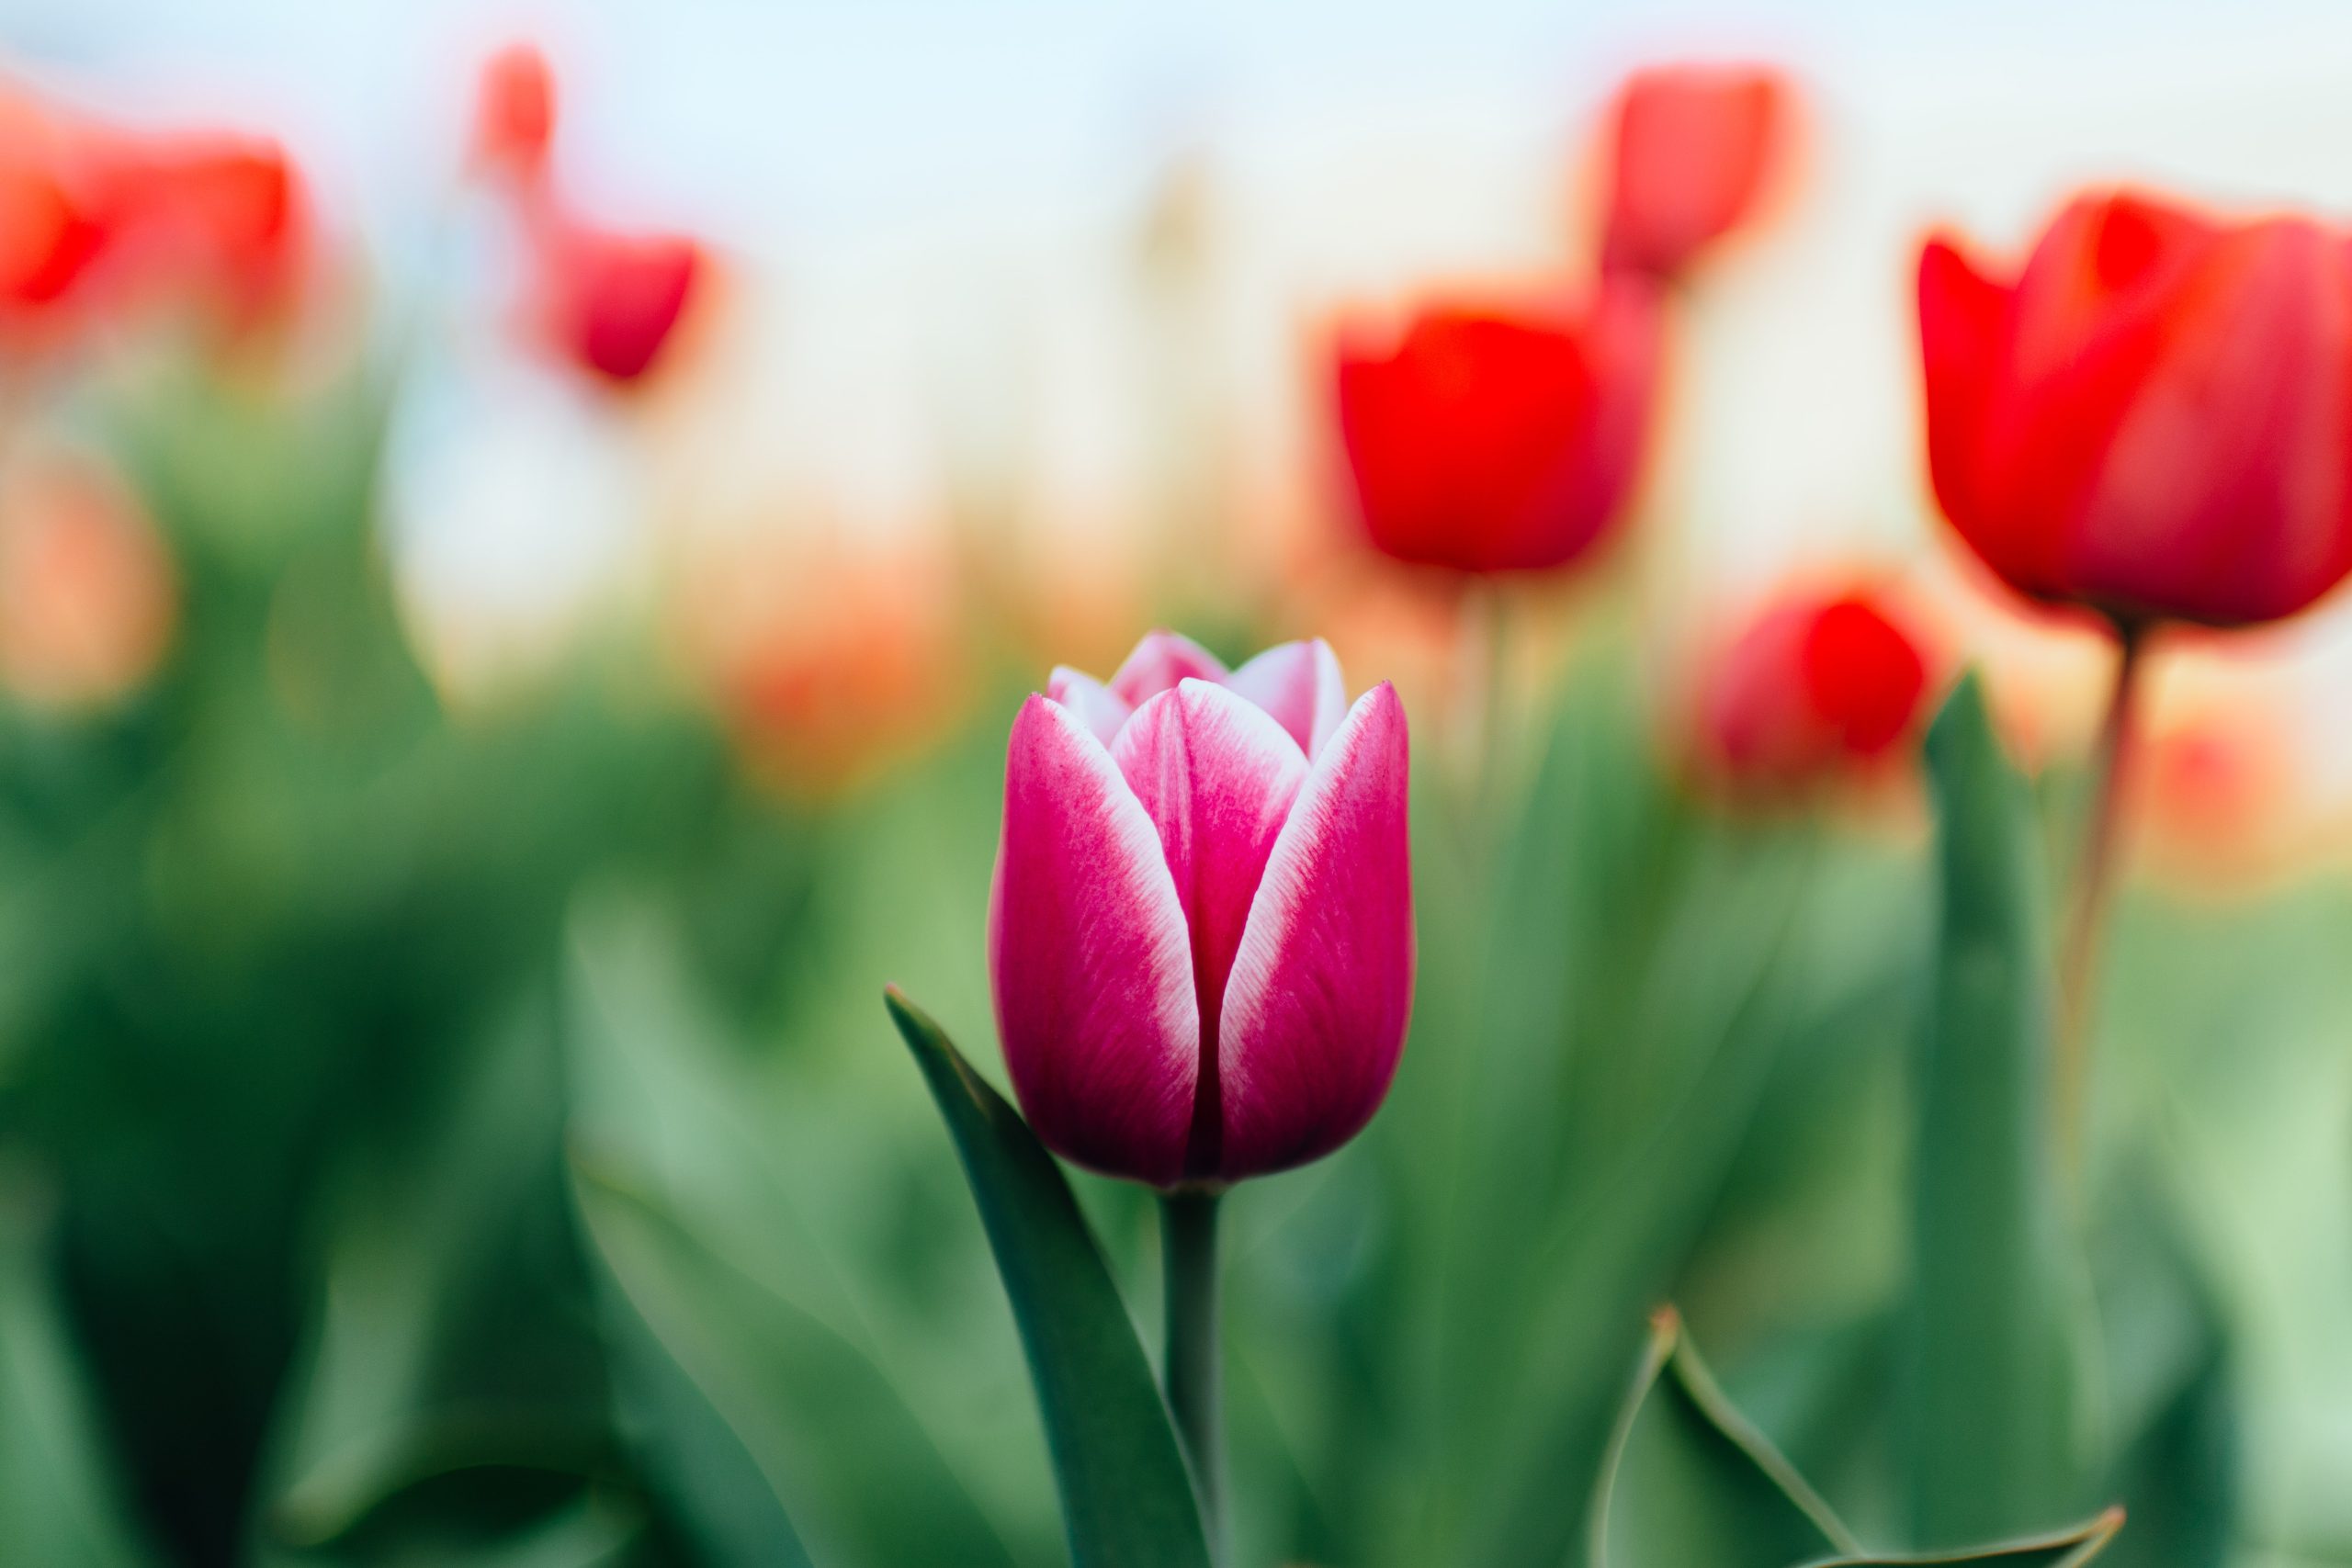 Image of tulips flowers representing spring